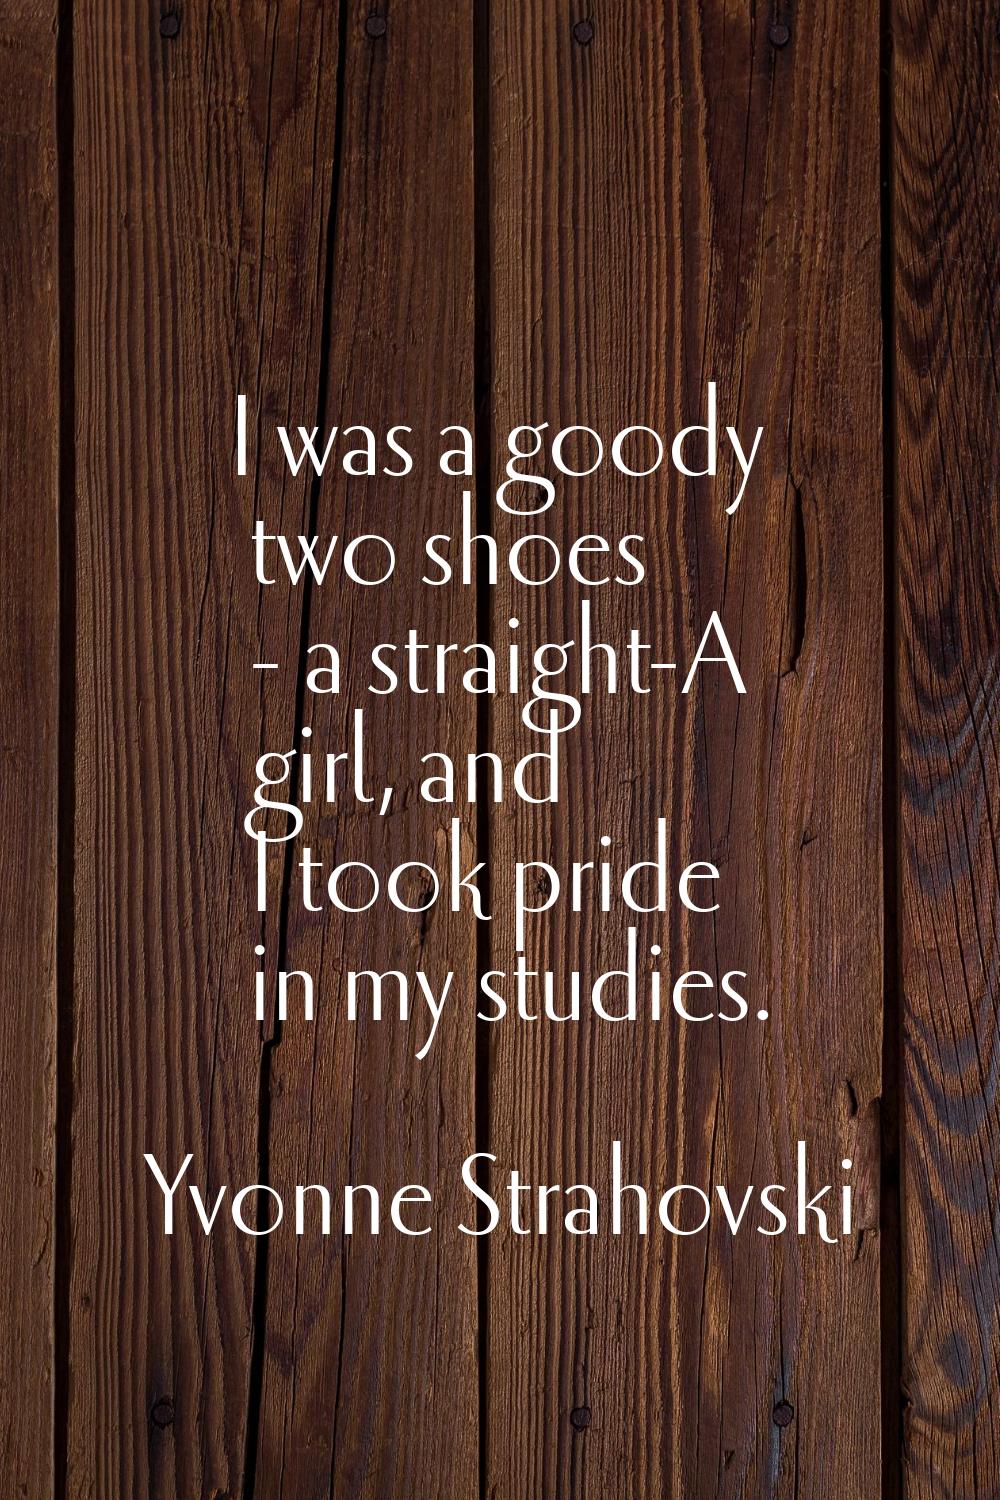 I was a goody two shoes - a straight-A girl, and I took pride in my studies.